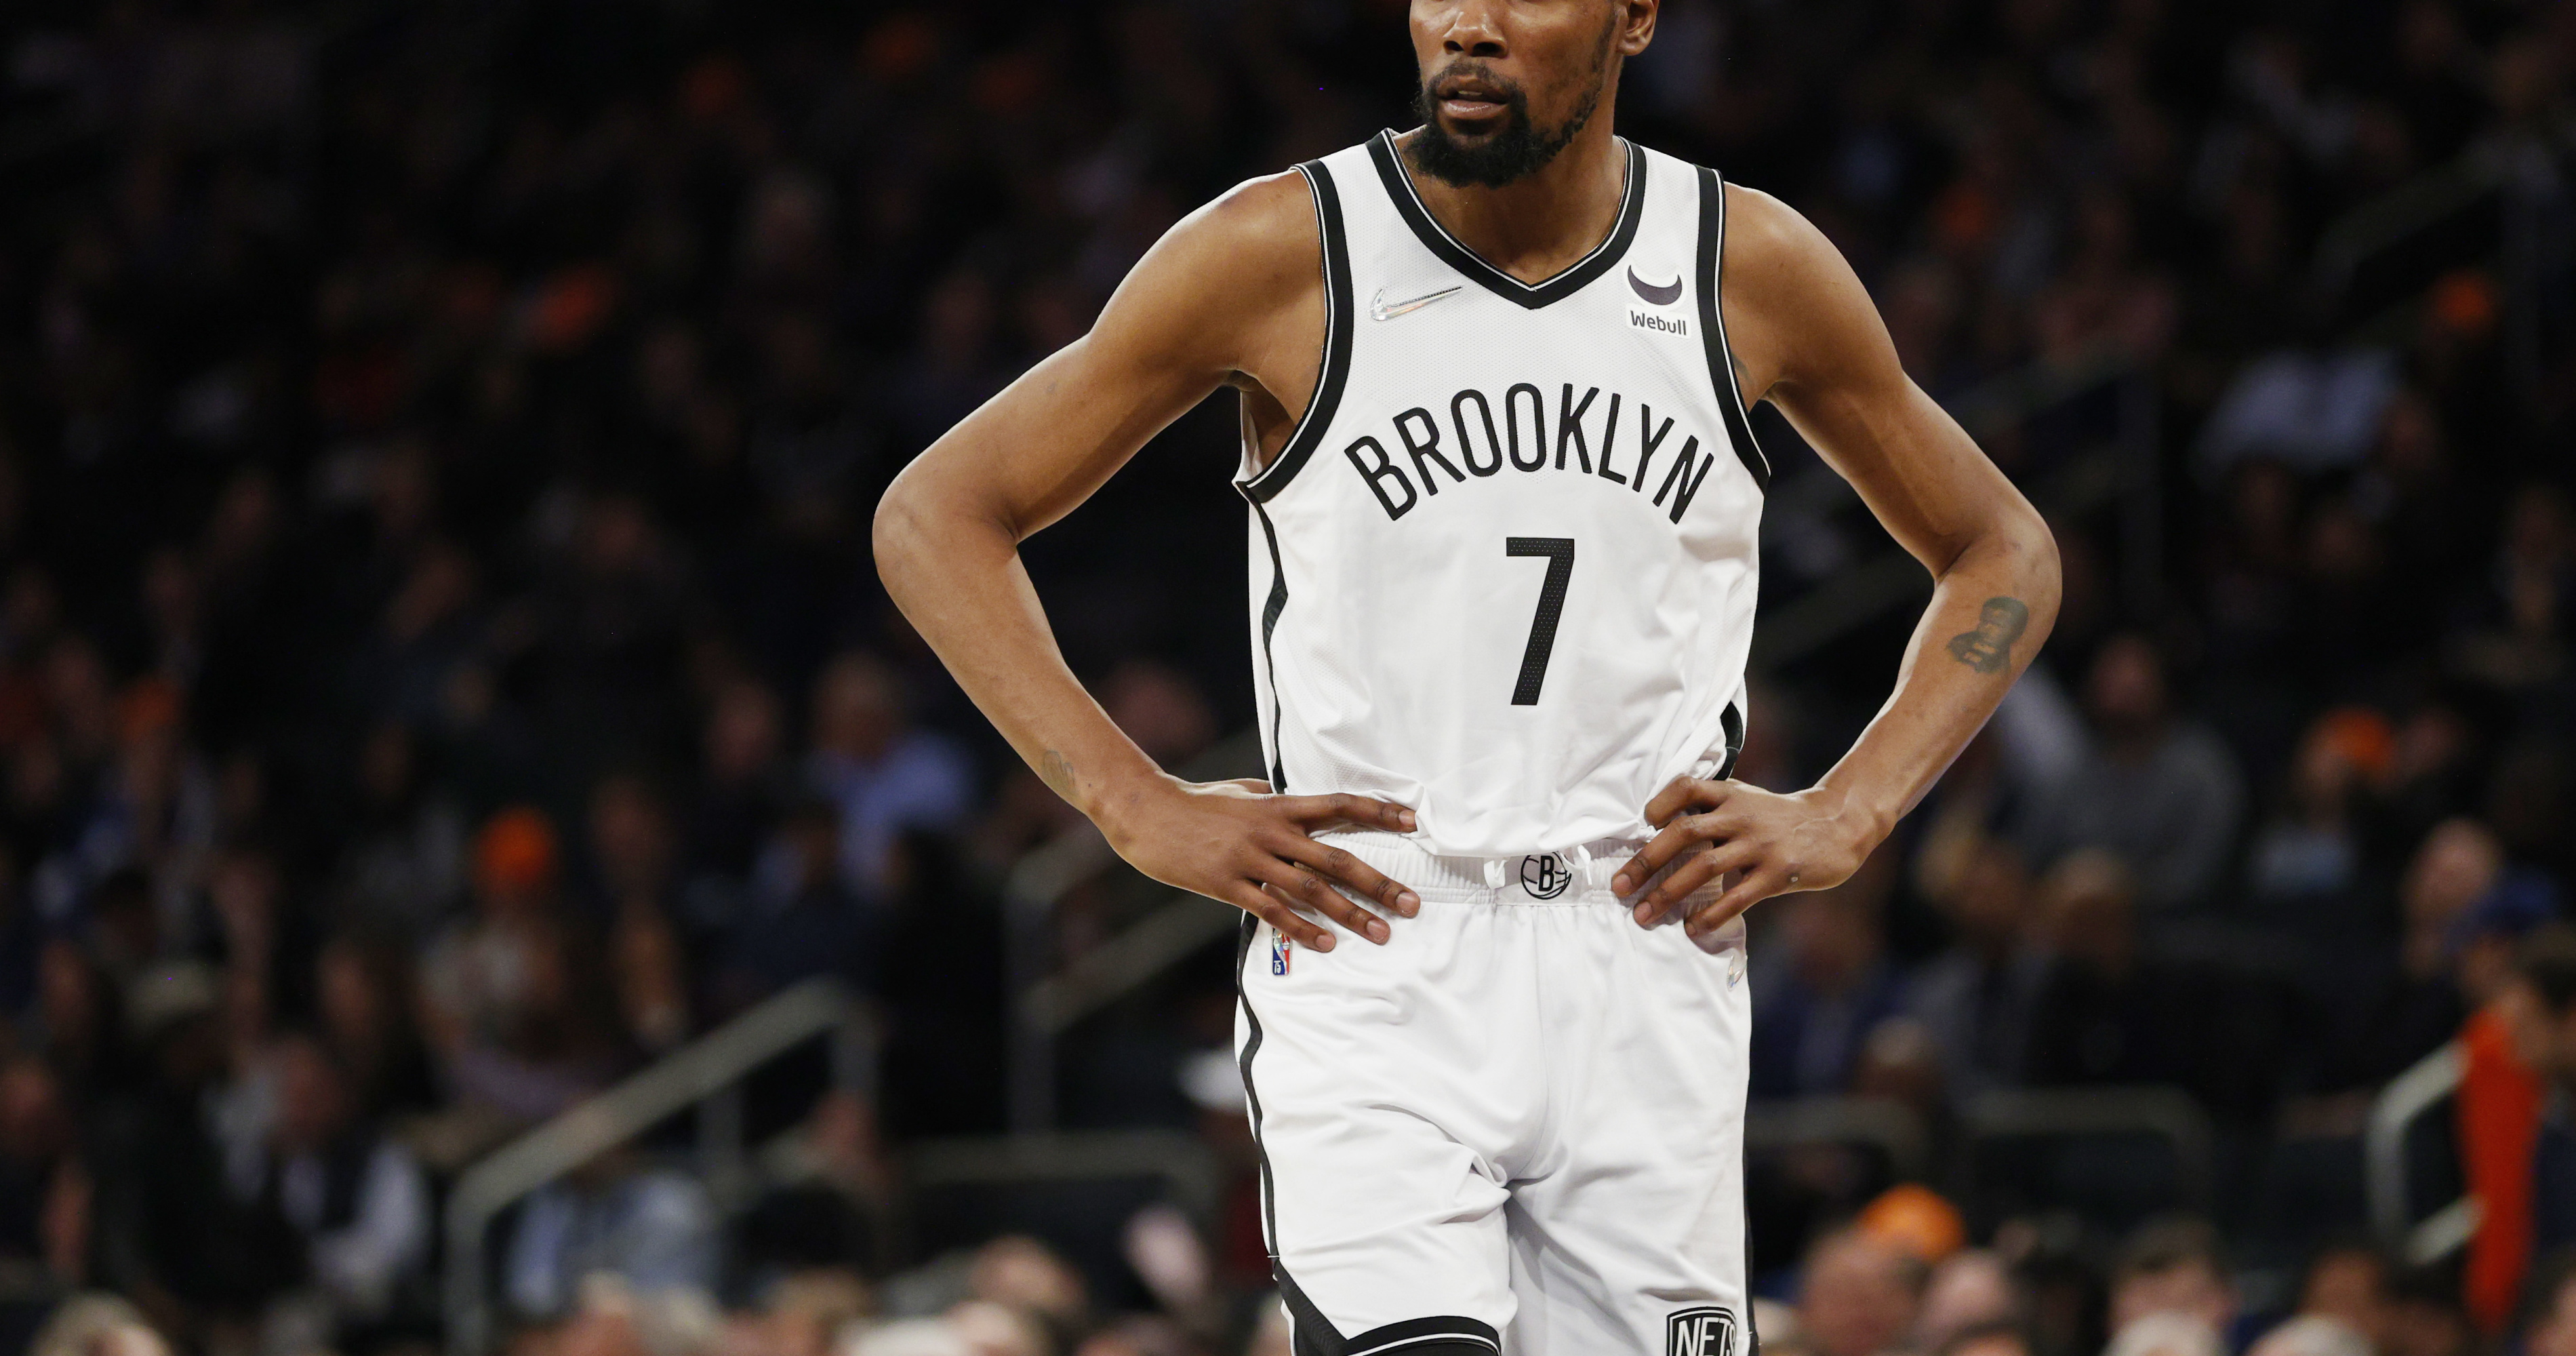 Kevin Durant: Phoenix Suns acquire Kevin Durant from the Brooklyn Nets, per  reports